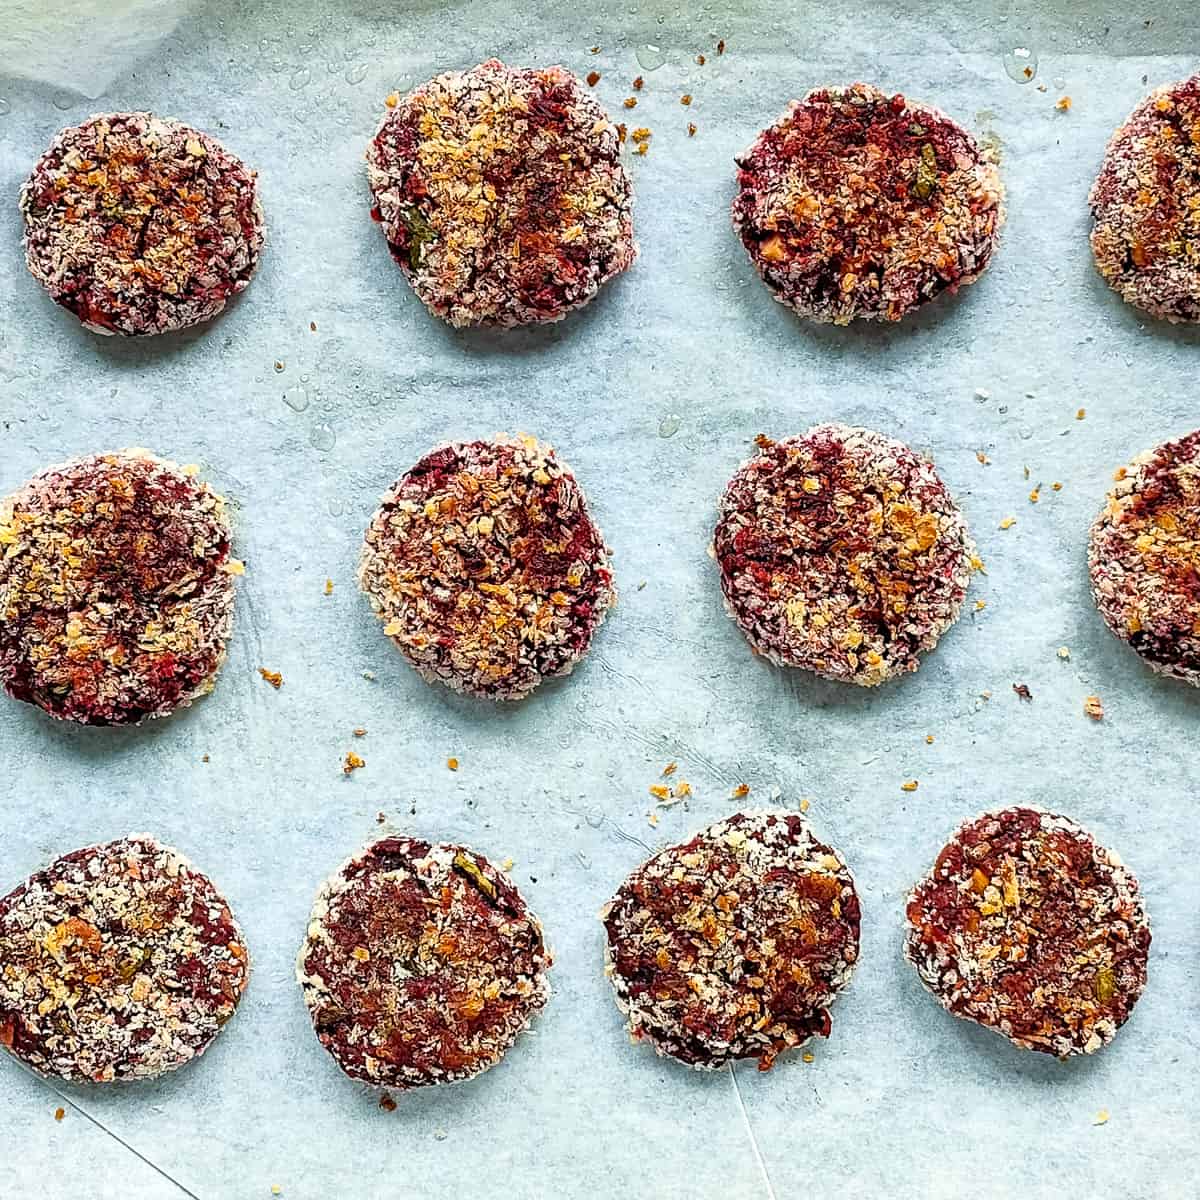 Baked beetroot cutlets on a baking sheet.